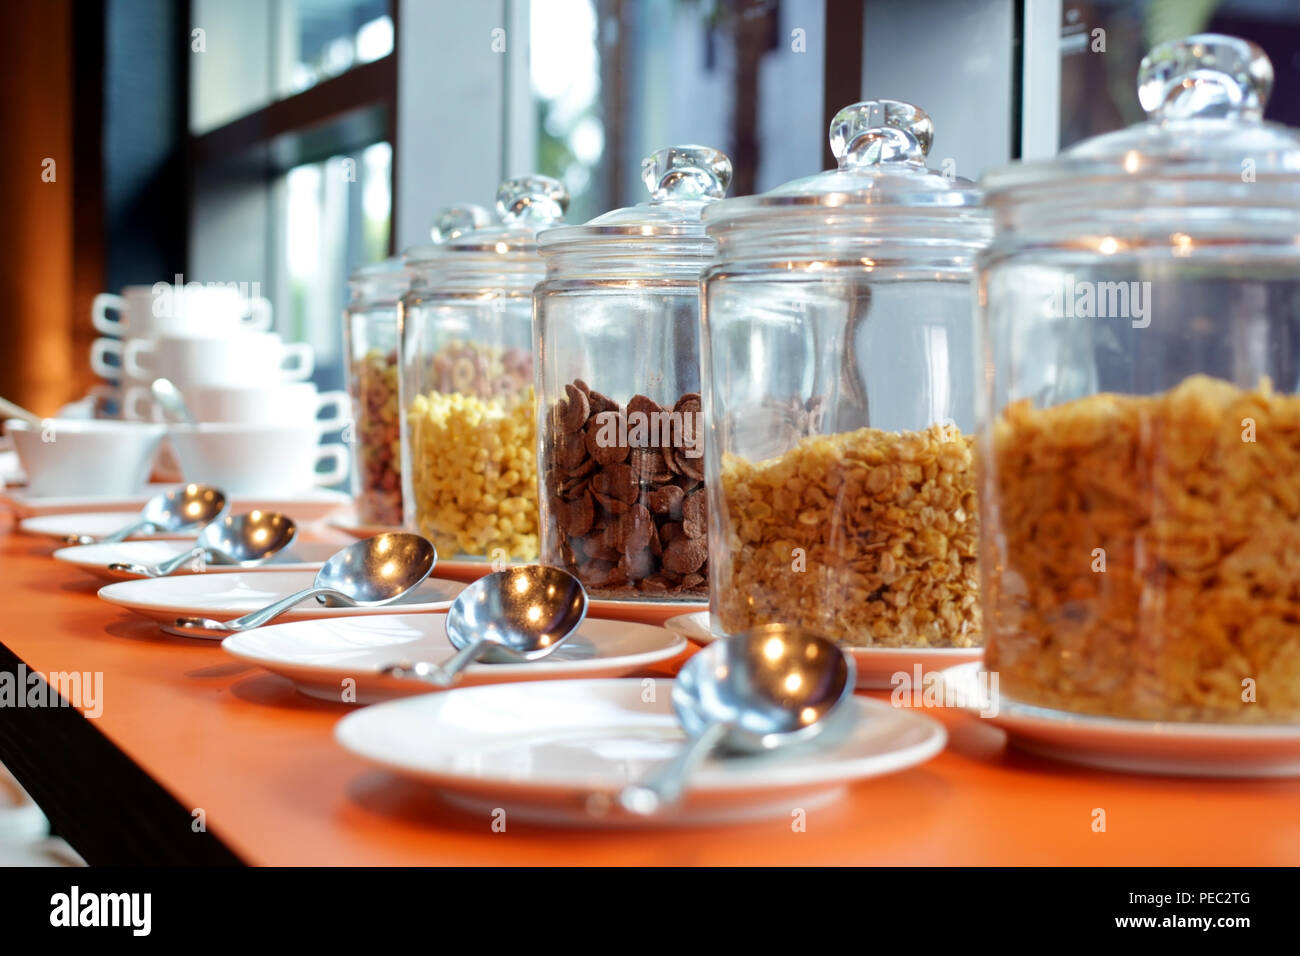 different kind of cereal cornflakes in a glass jar on buffet table Stock Photo